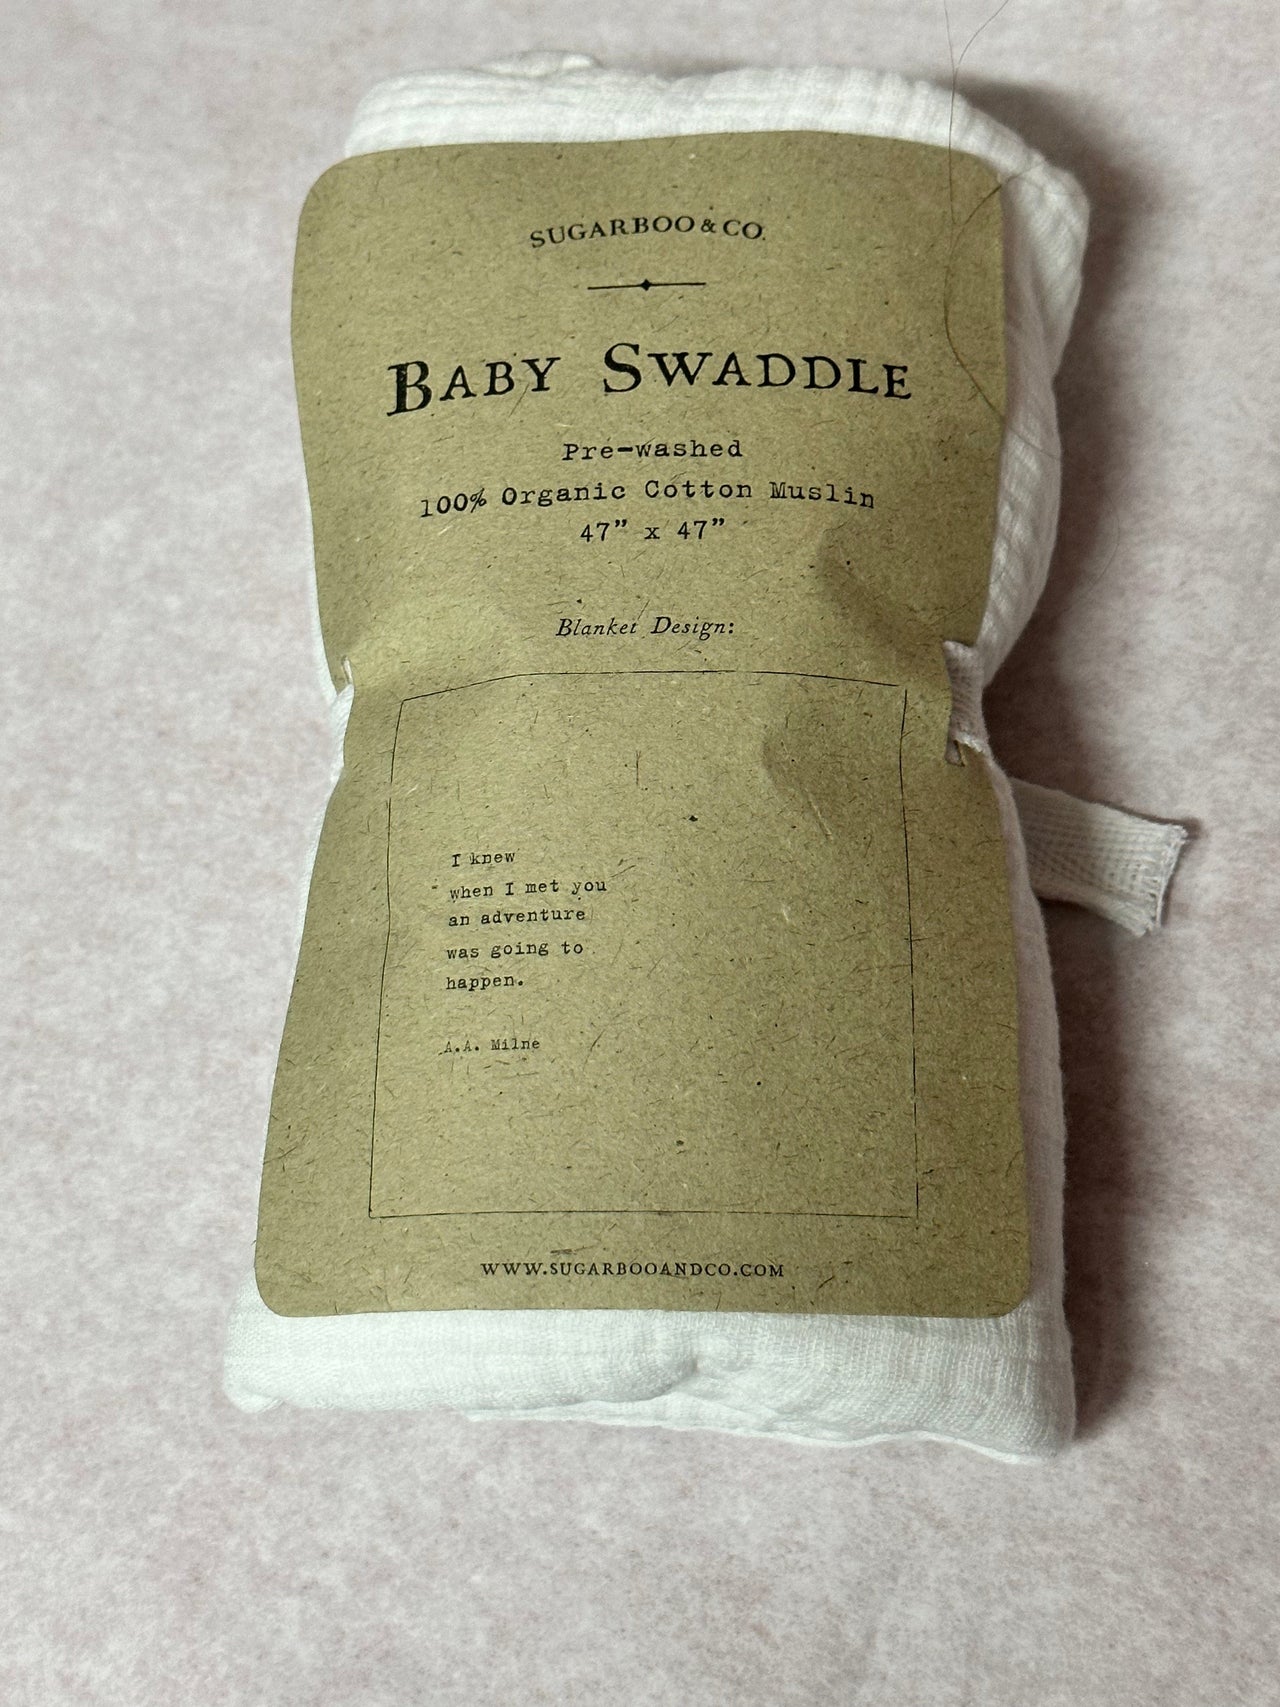 Baby Swaddle A.A. Milne Sugarboo Designs swaddle